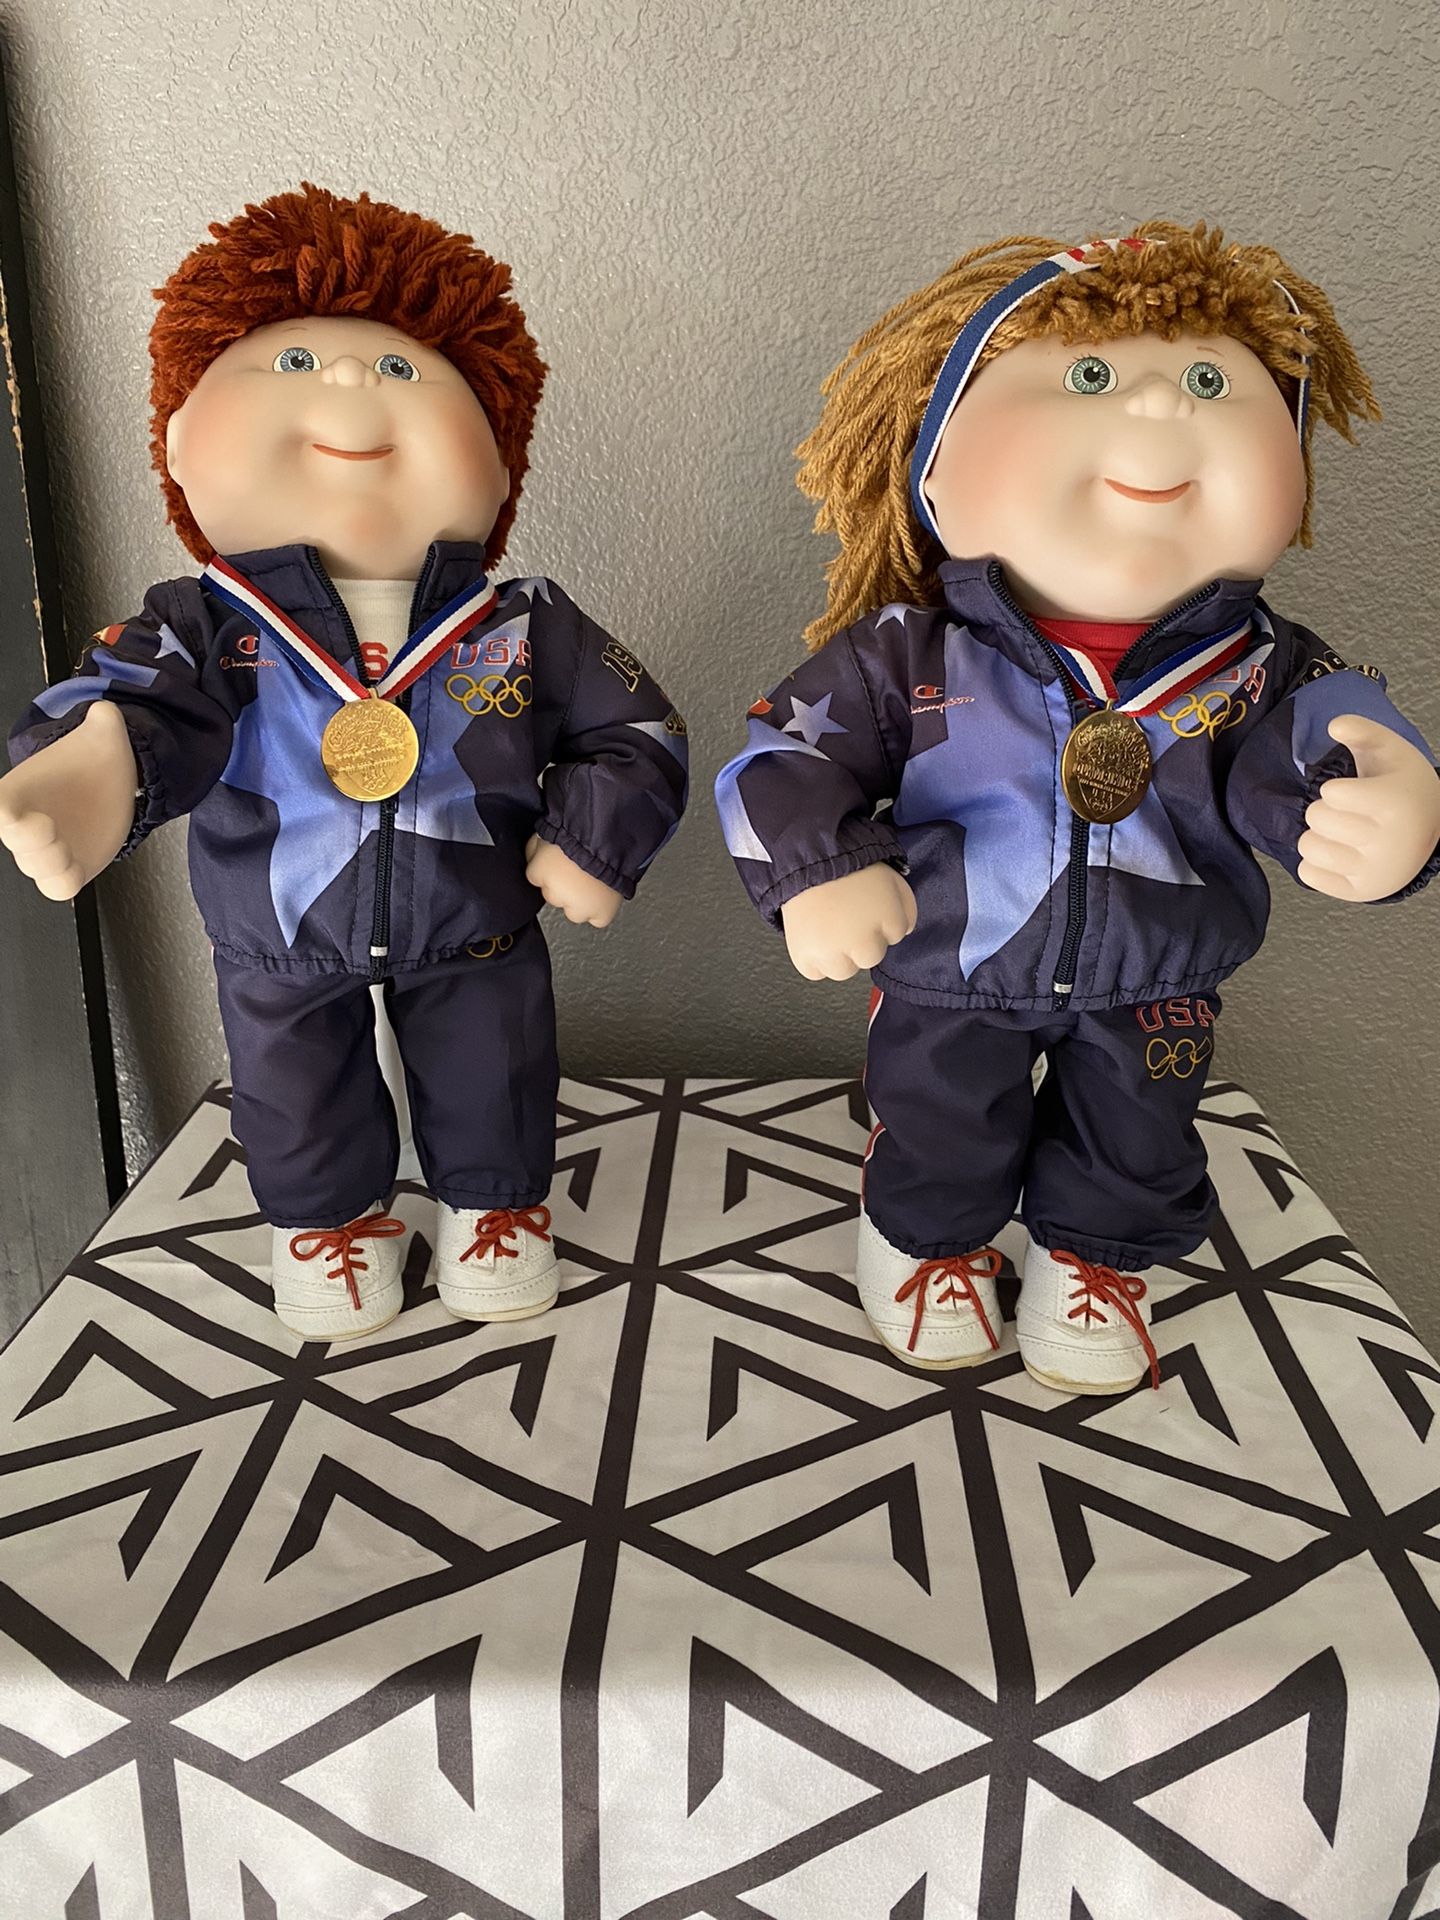 Cabbage Patch Olympics Dolls Porcelain 